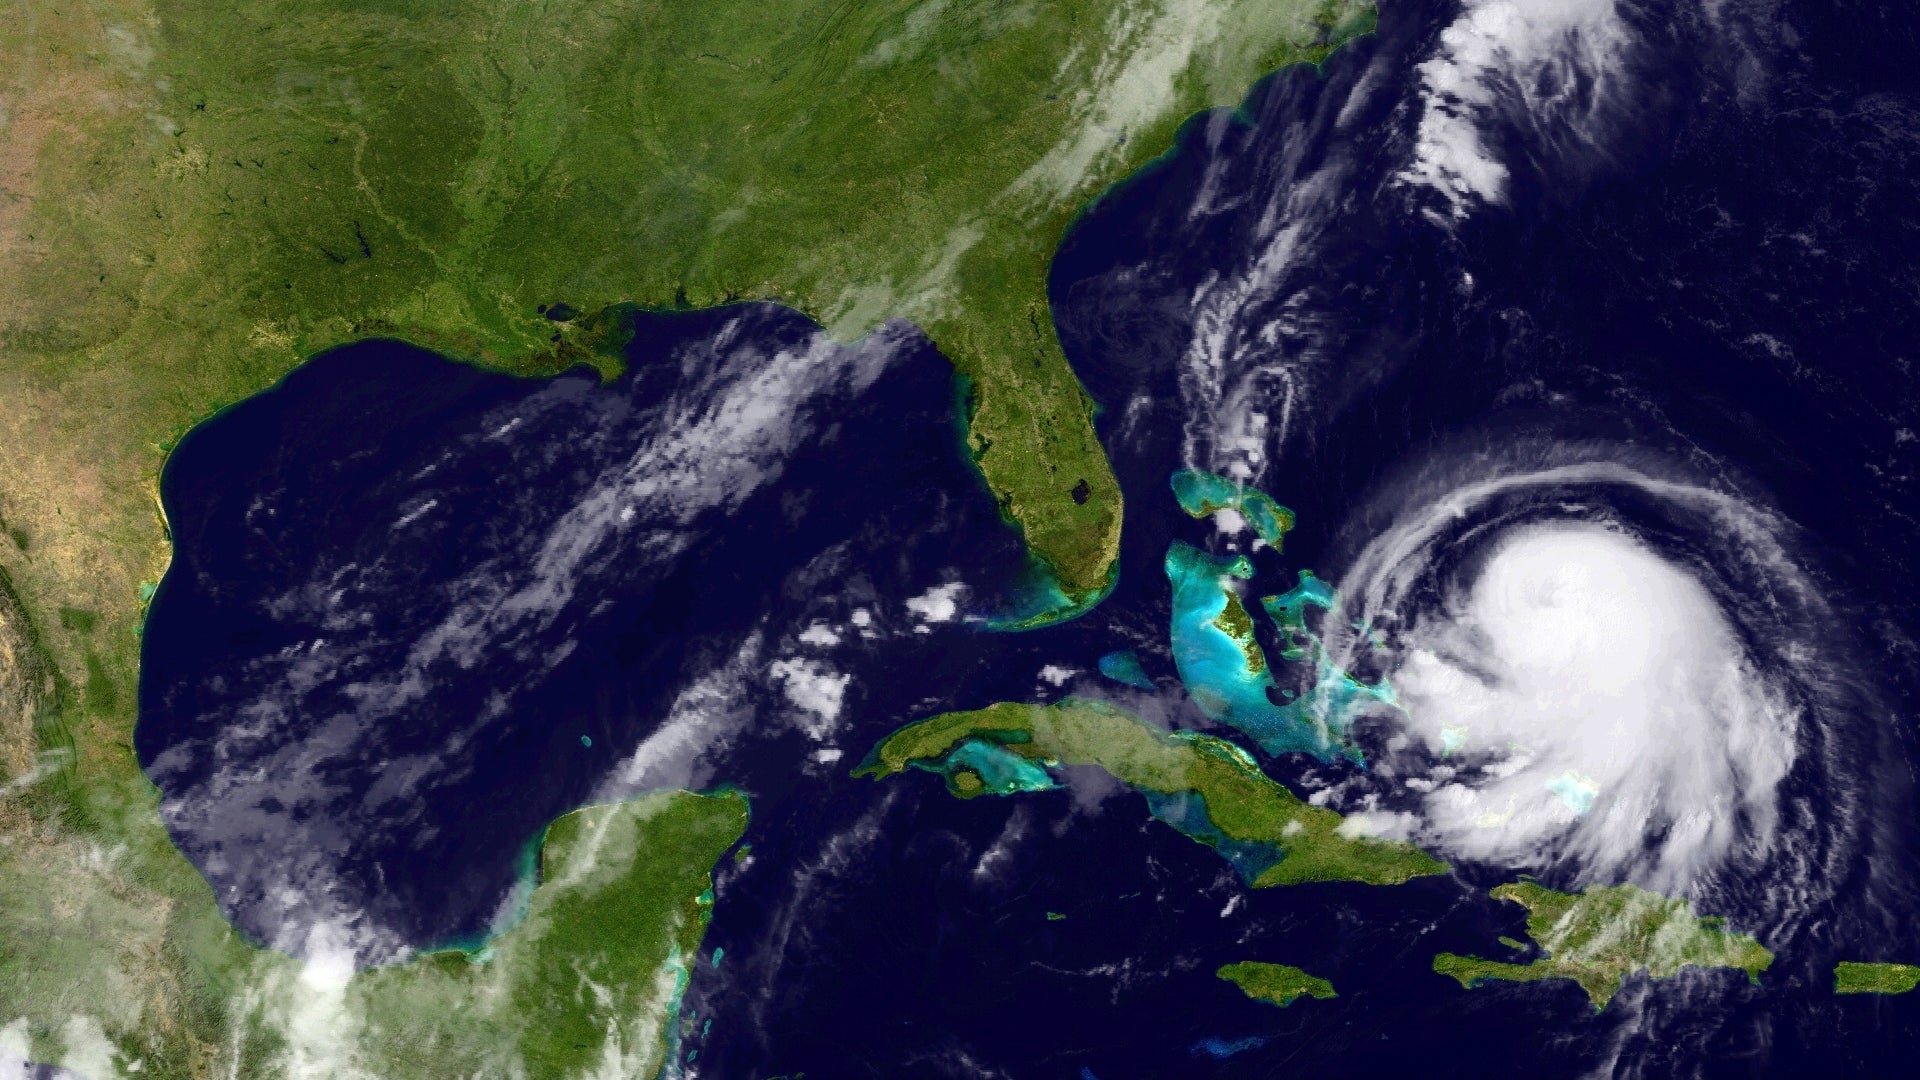 Hurrican Joaquin churns in the Caribbean, in a picture released by the US National Oceanic and Atmospheric Administration